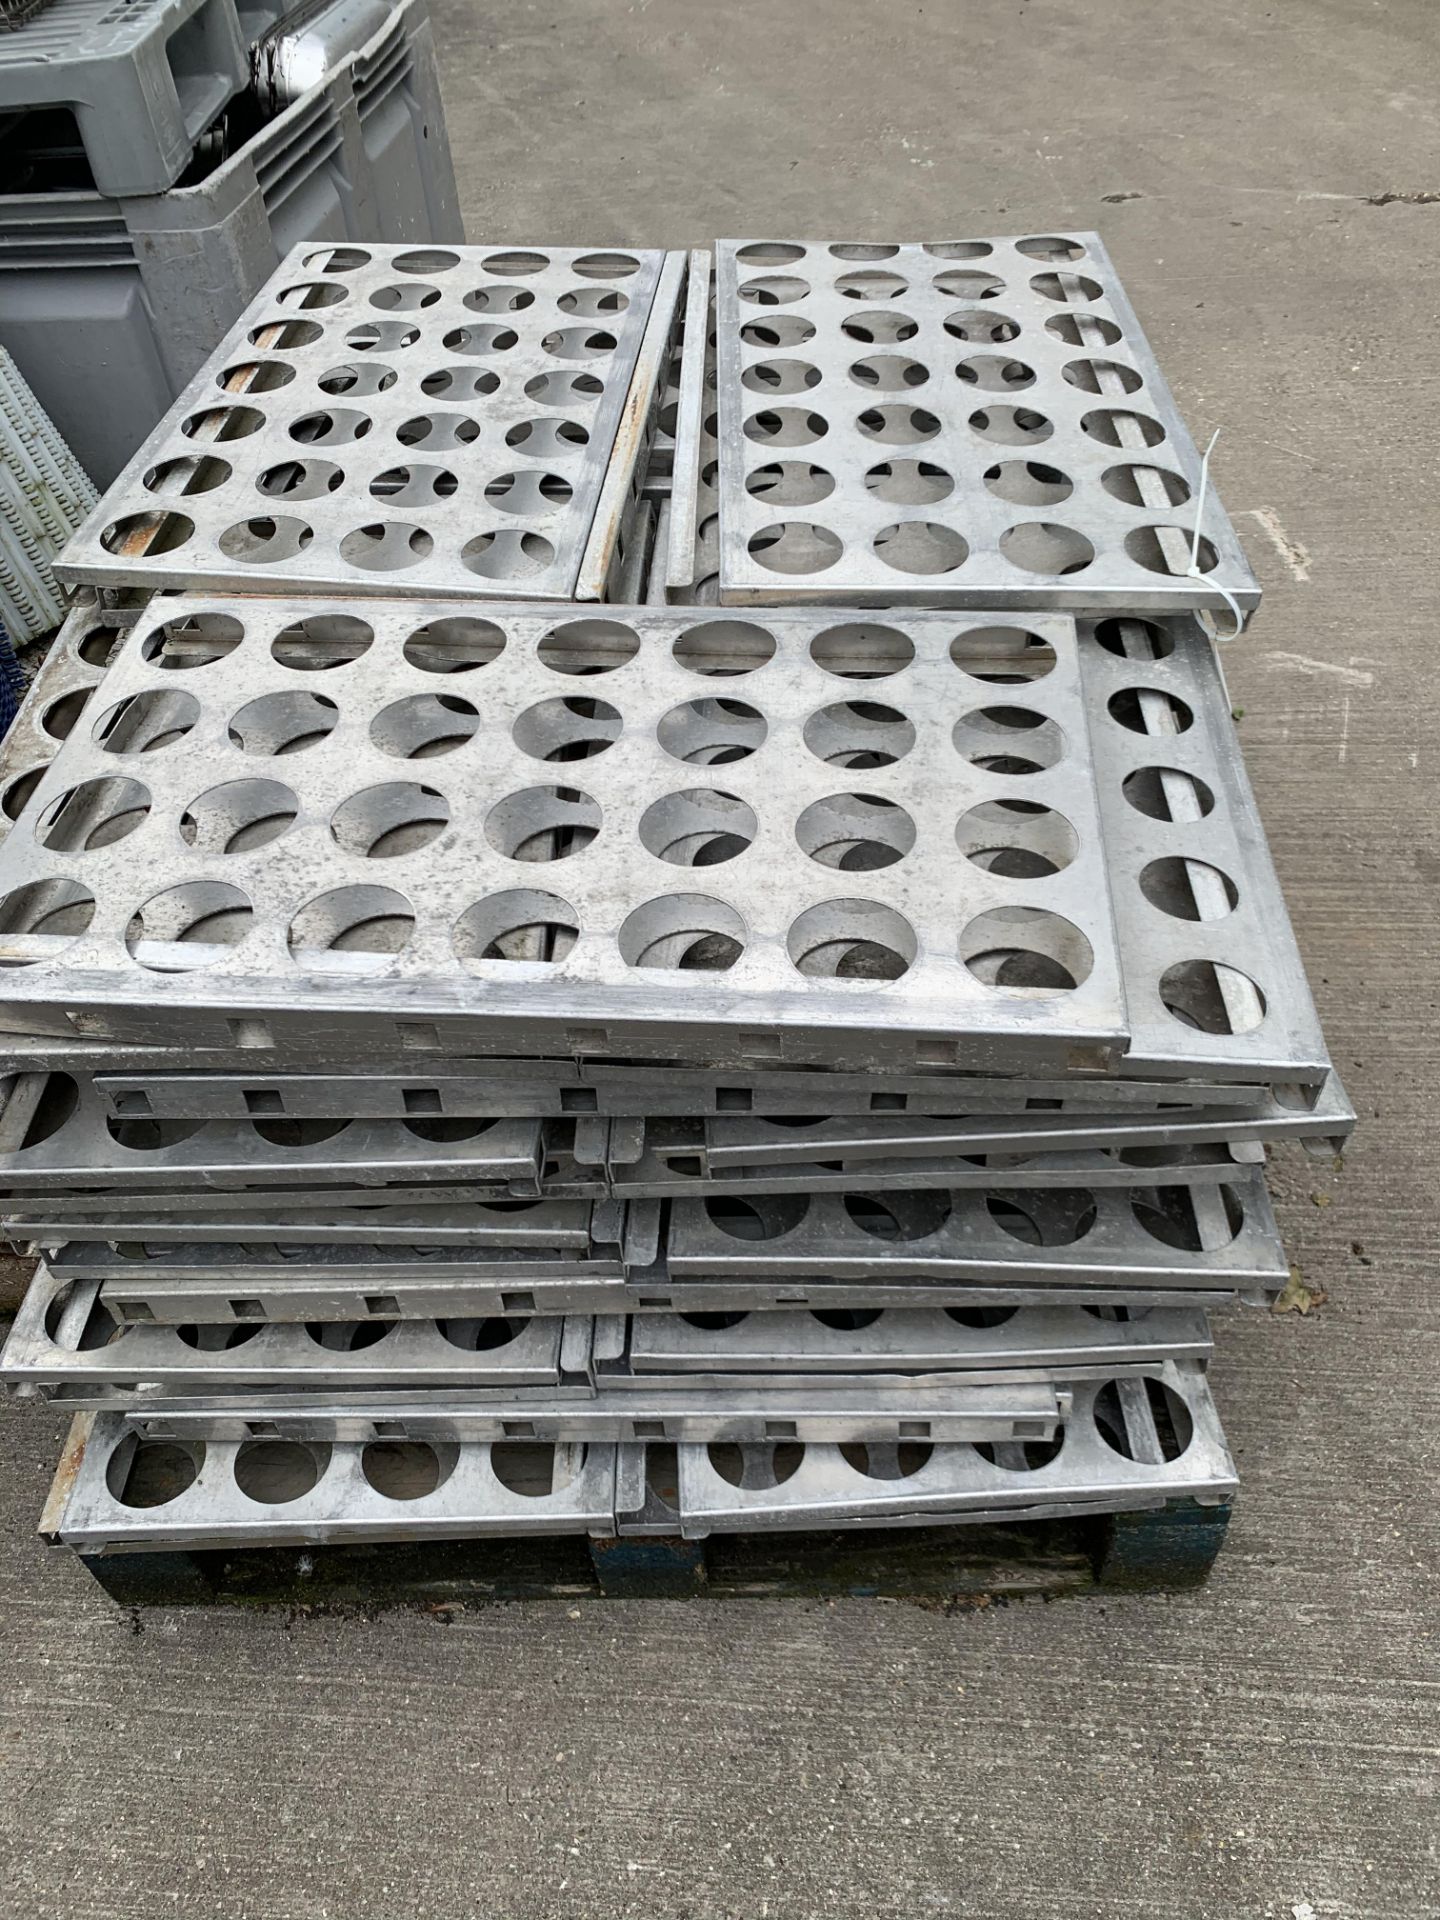 Approx. 60 x Aluminium Pie Trays, approx. 660mm lo - Image 2 of 2